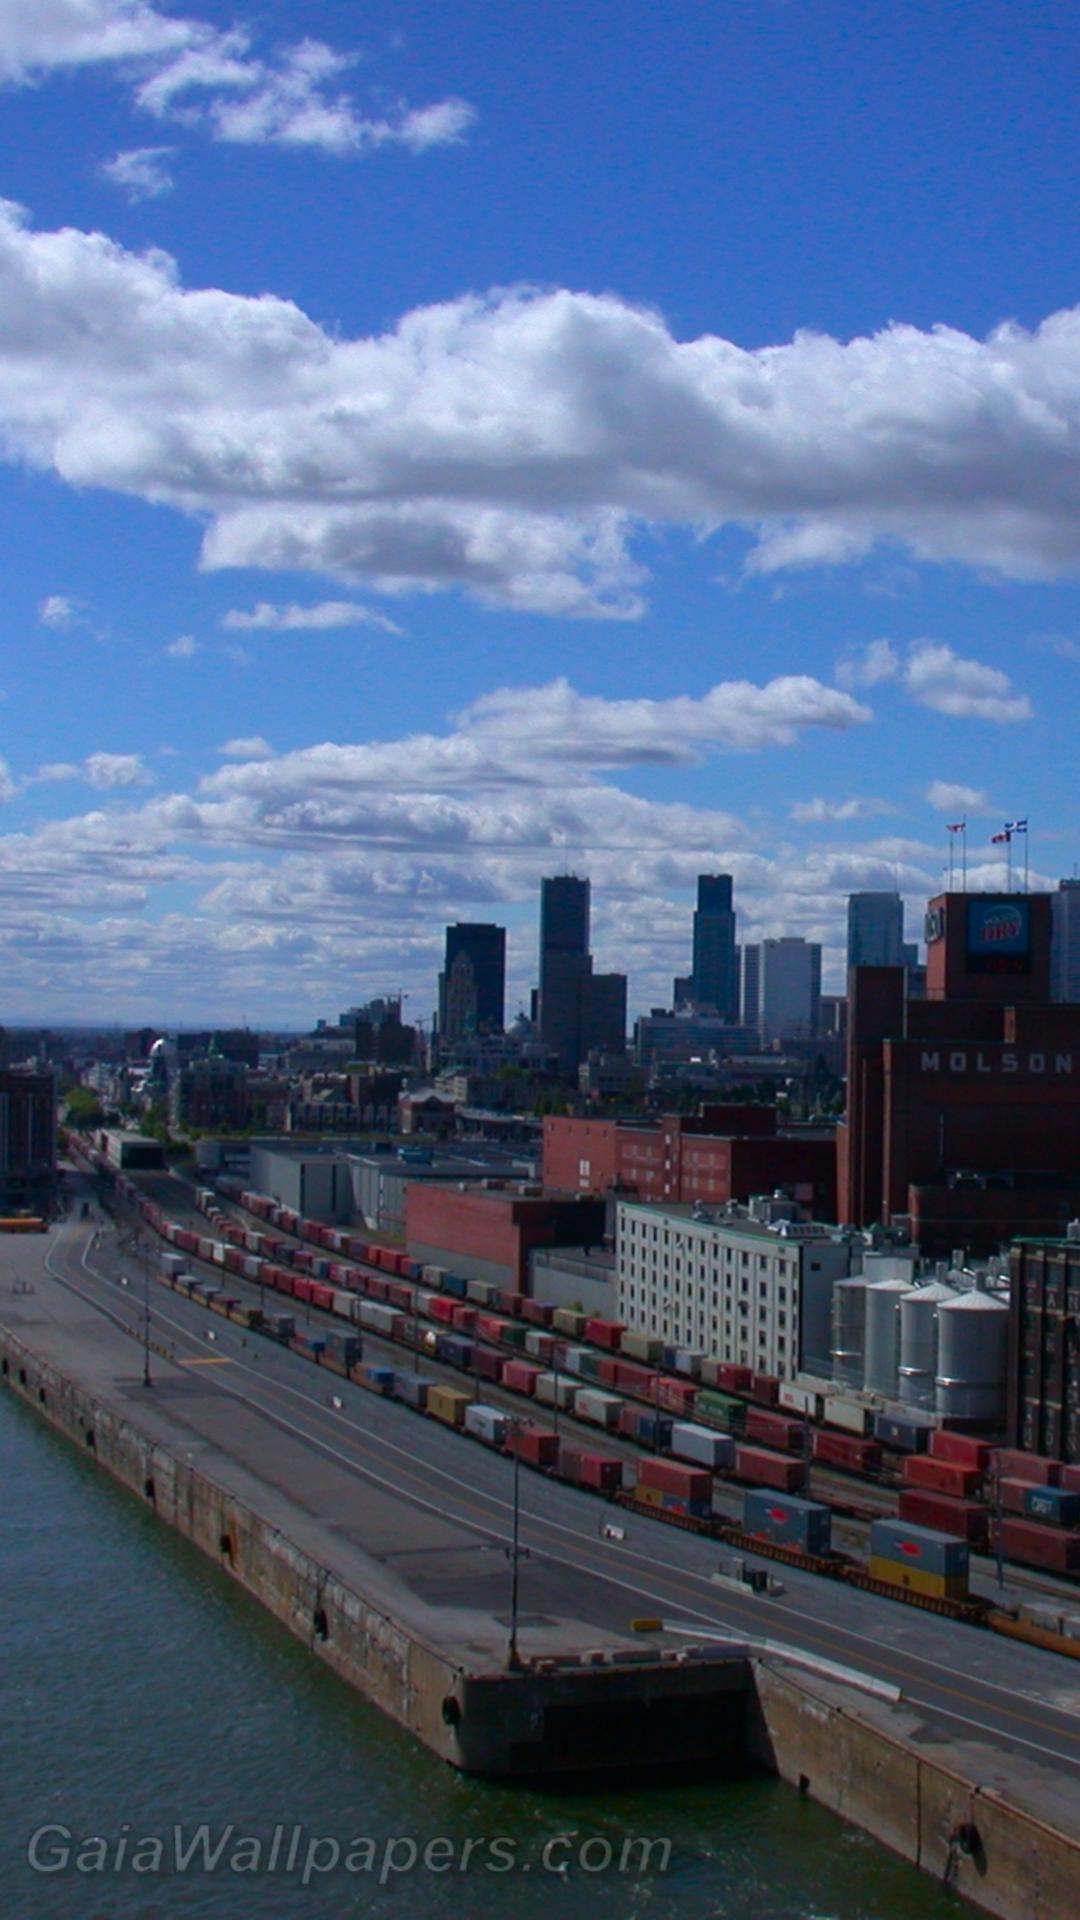 Old Port of Montreal seen from the Jacques Cartier Bridge - Free desktop wallpapers